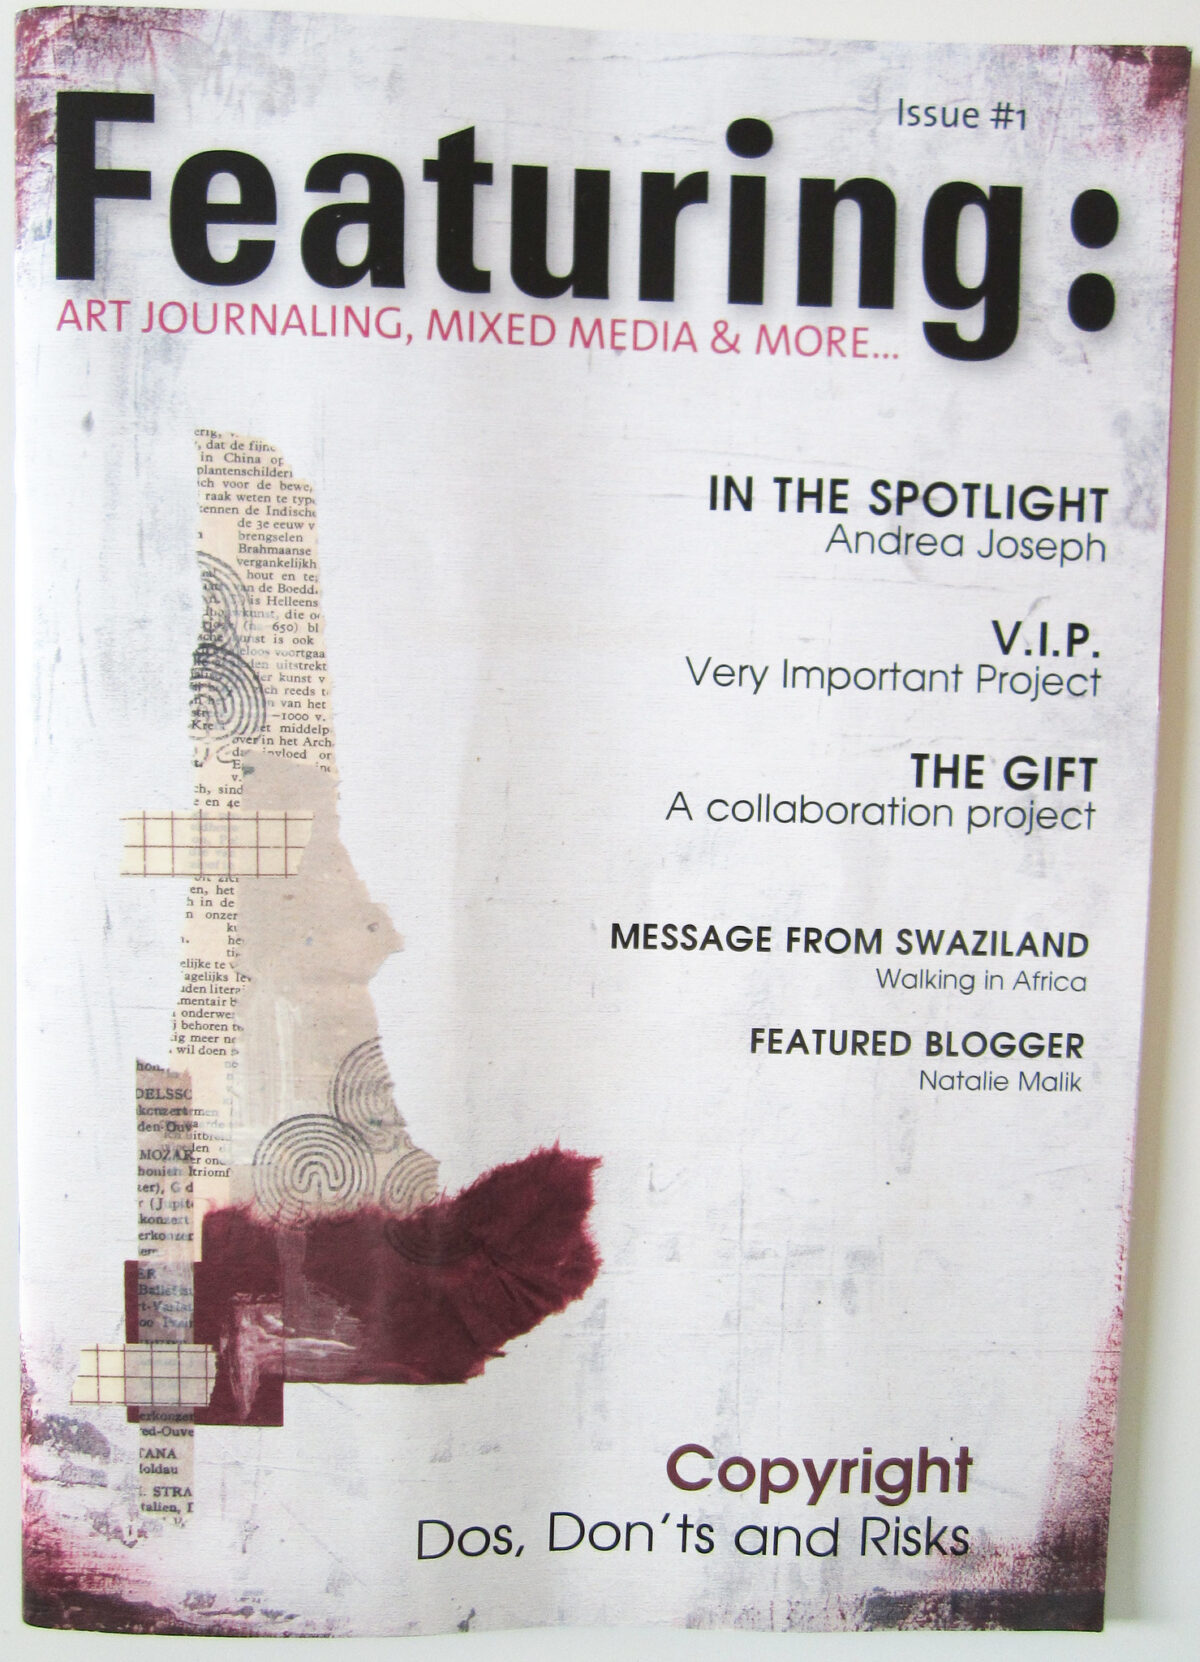 The Featuring Magazine is about art journaling